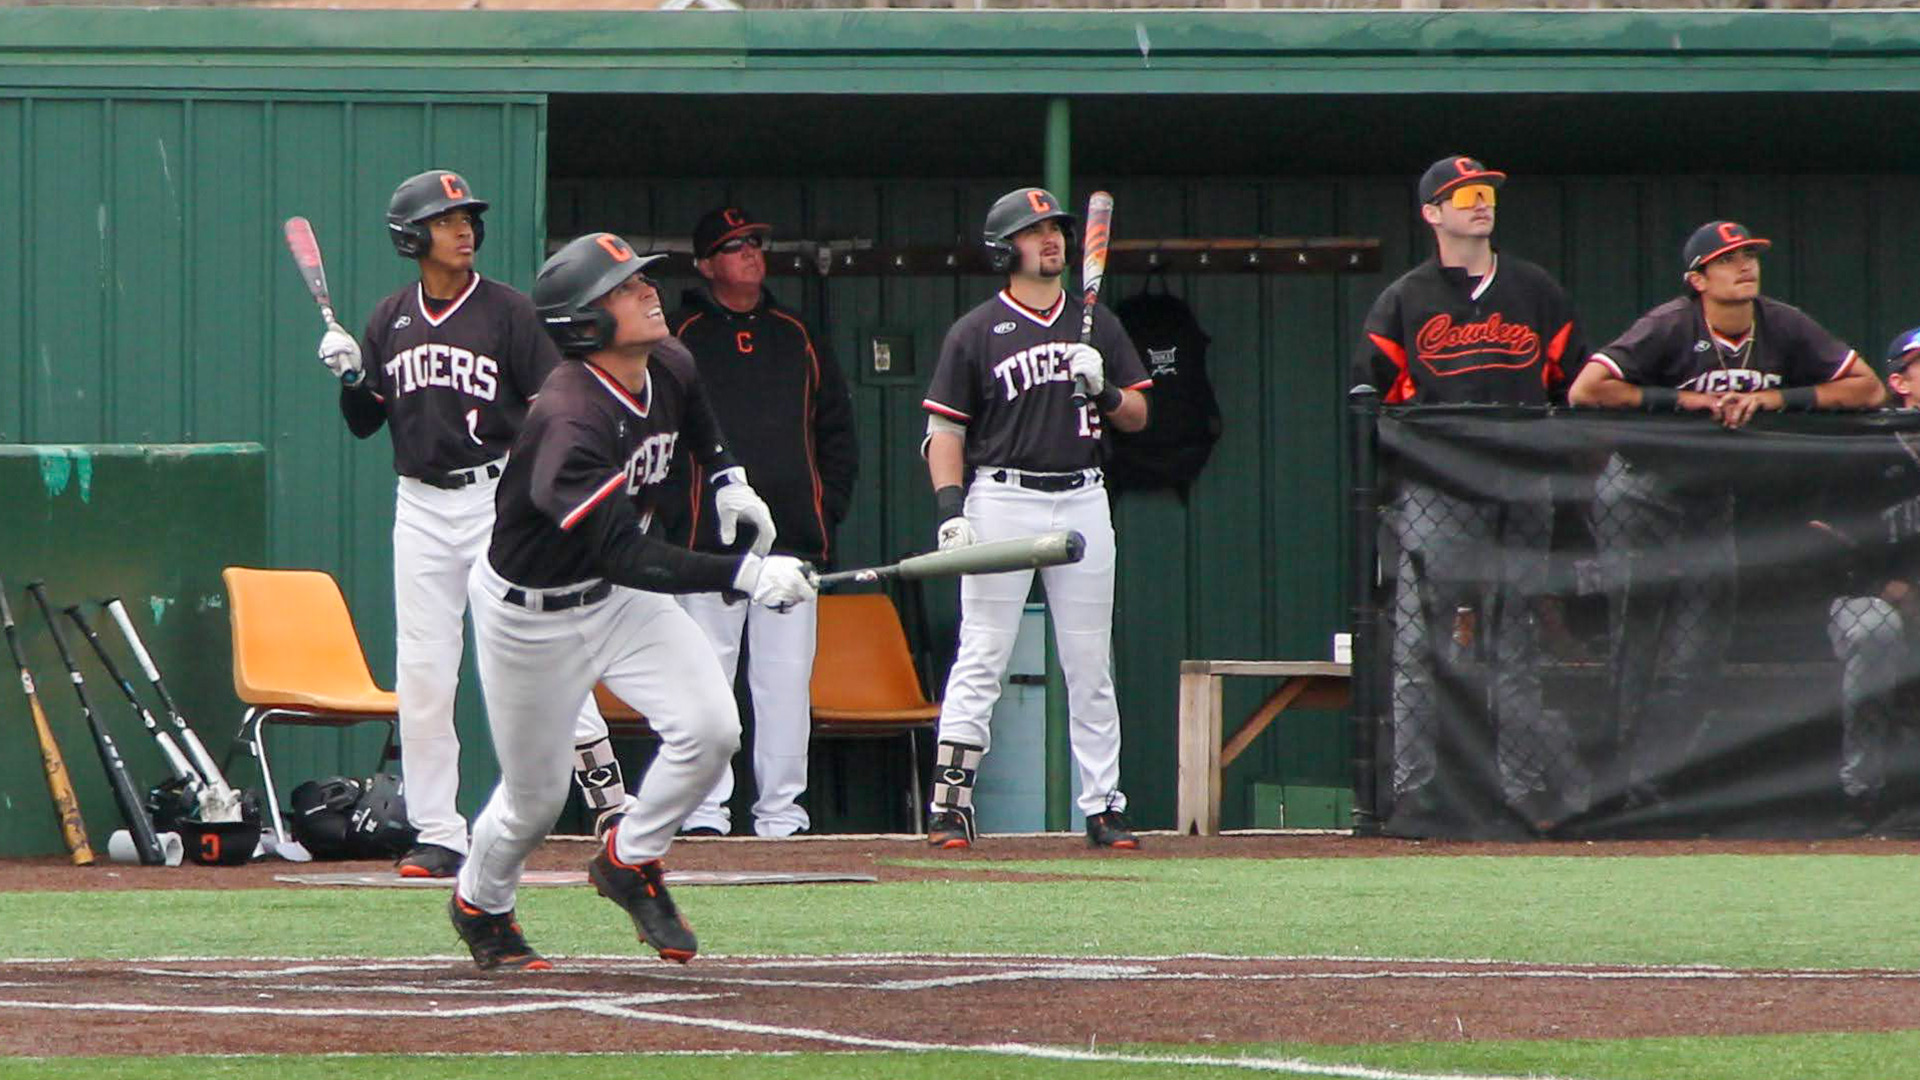 Tigers erupt for season highs in runs and hits in win over Seminole State